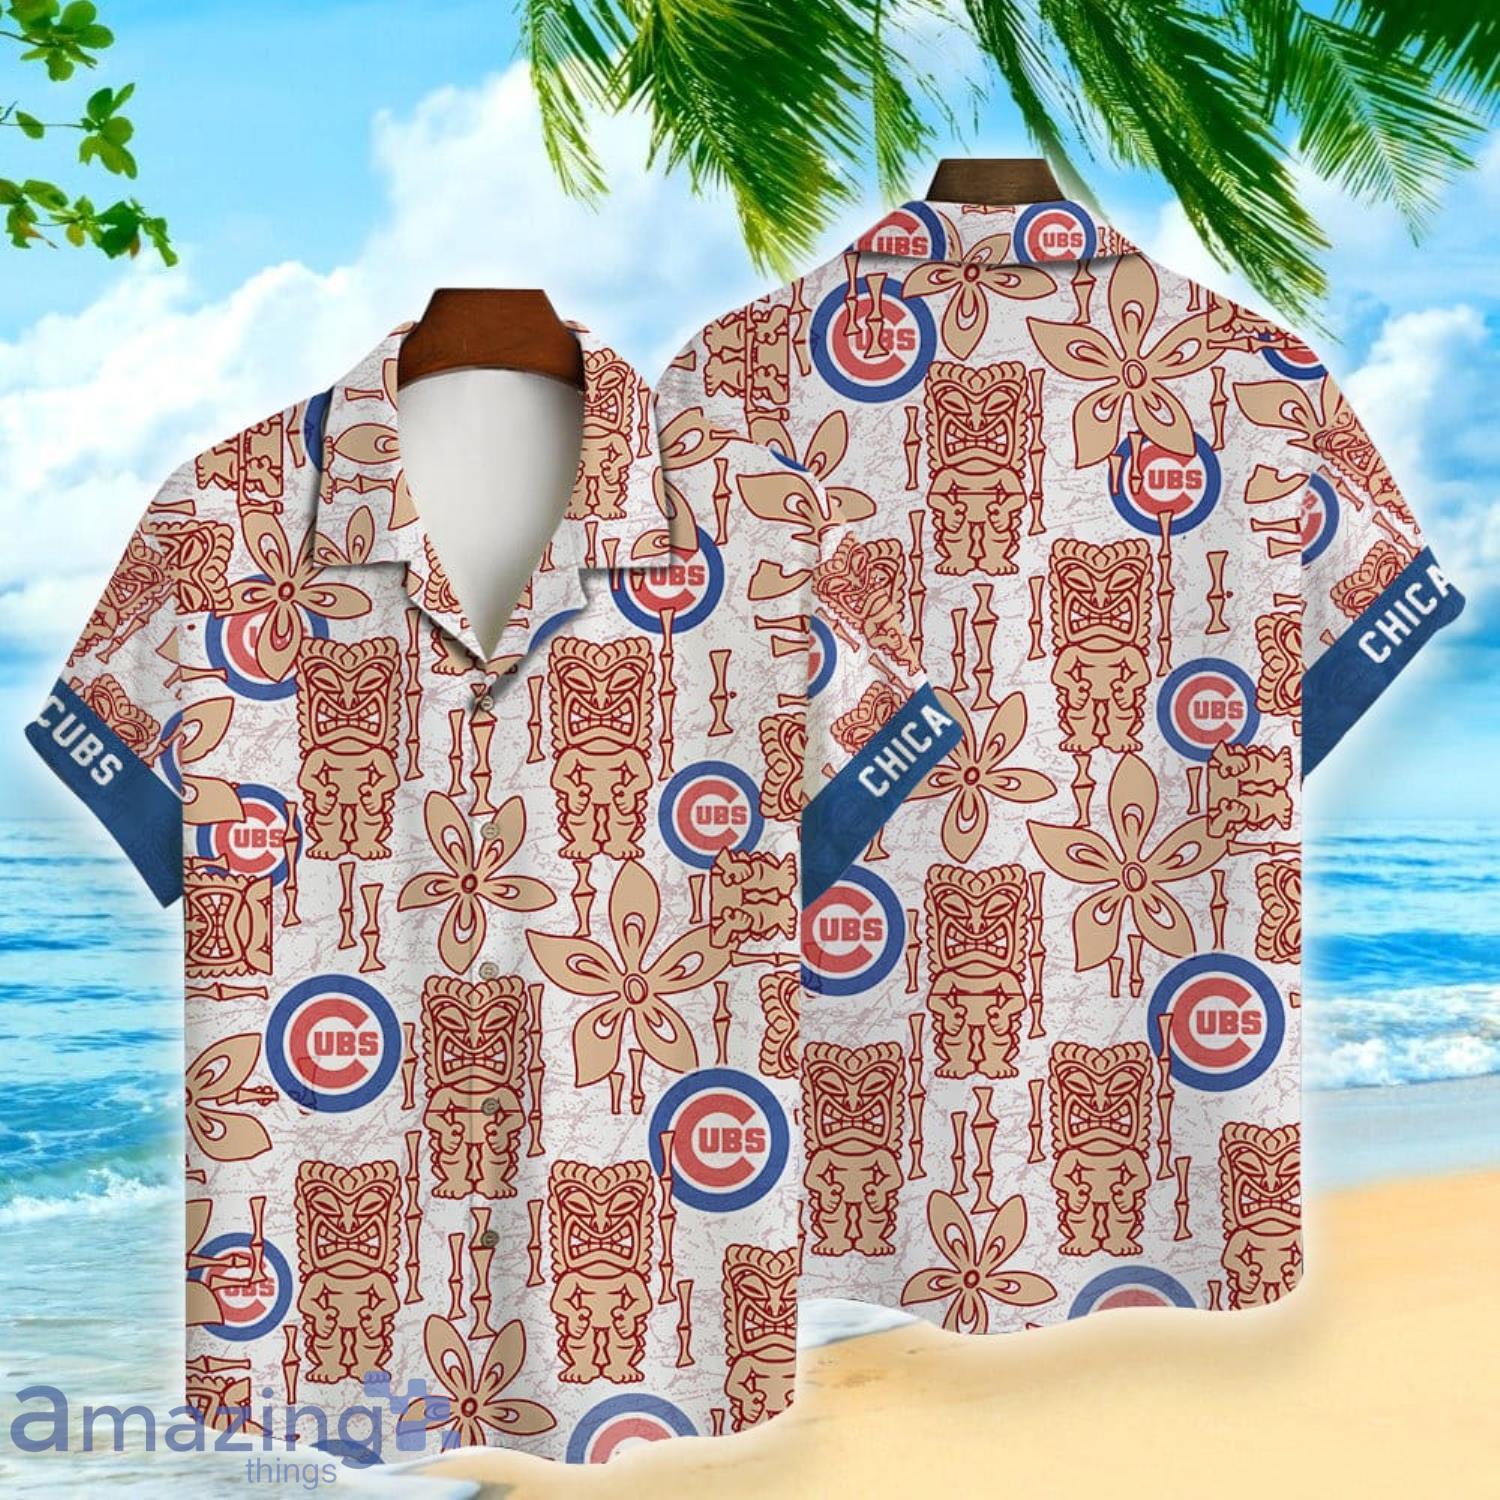 chicago cubs button down